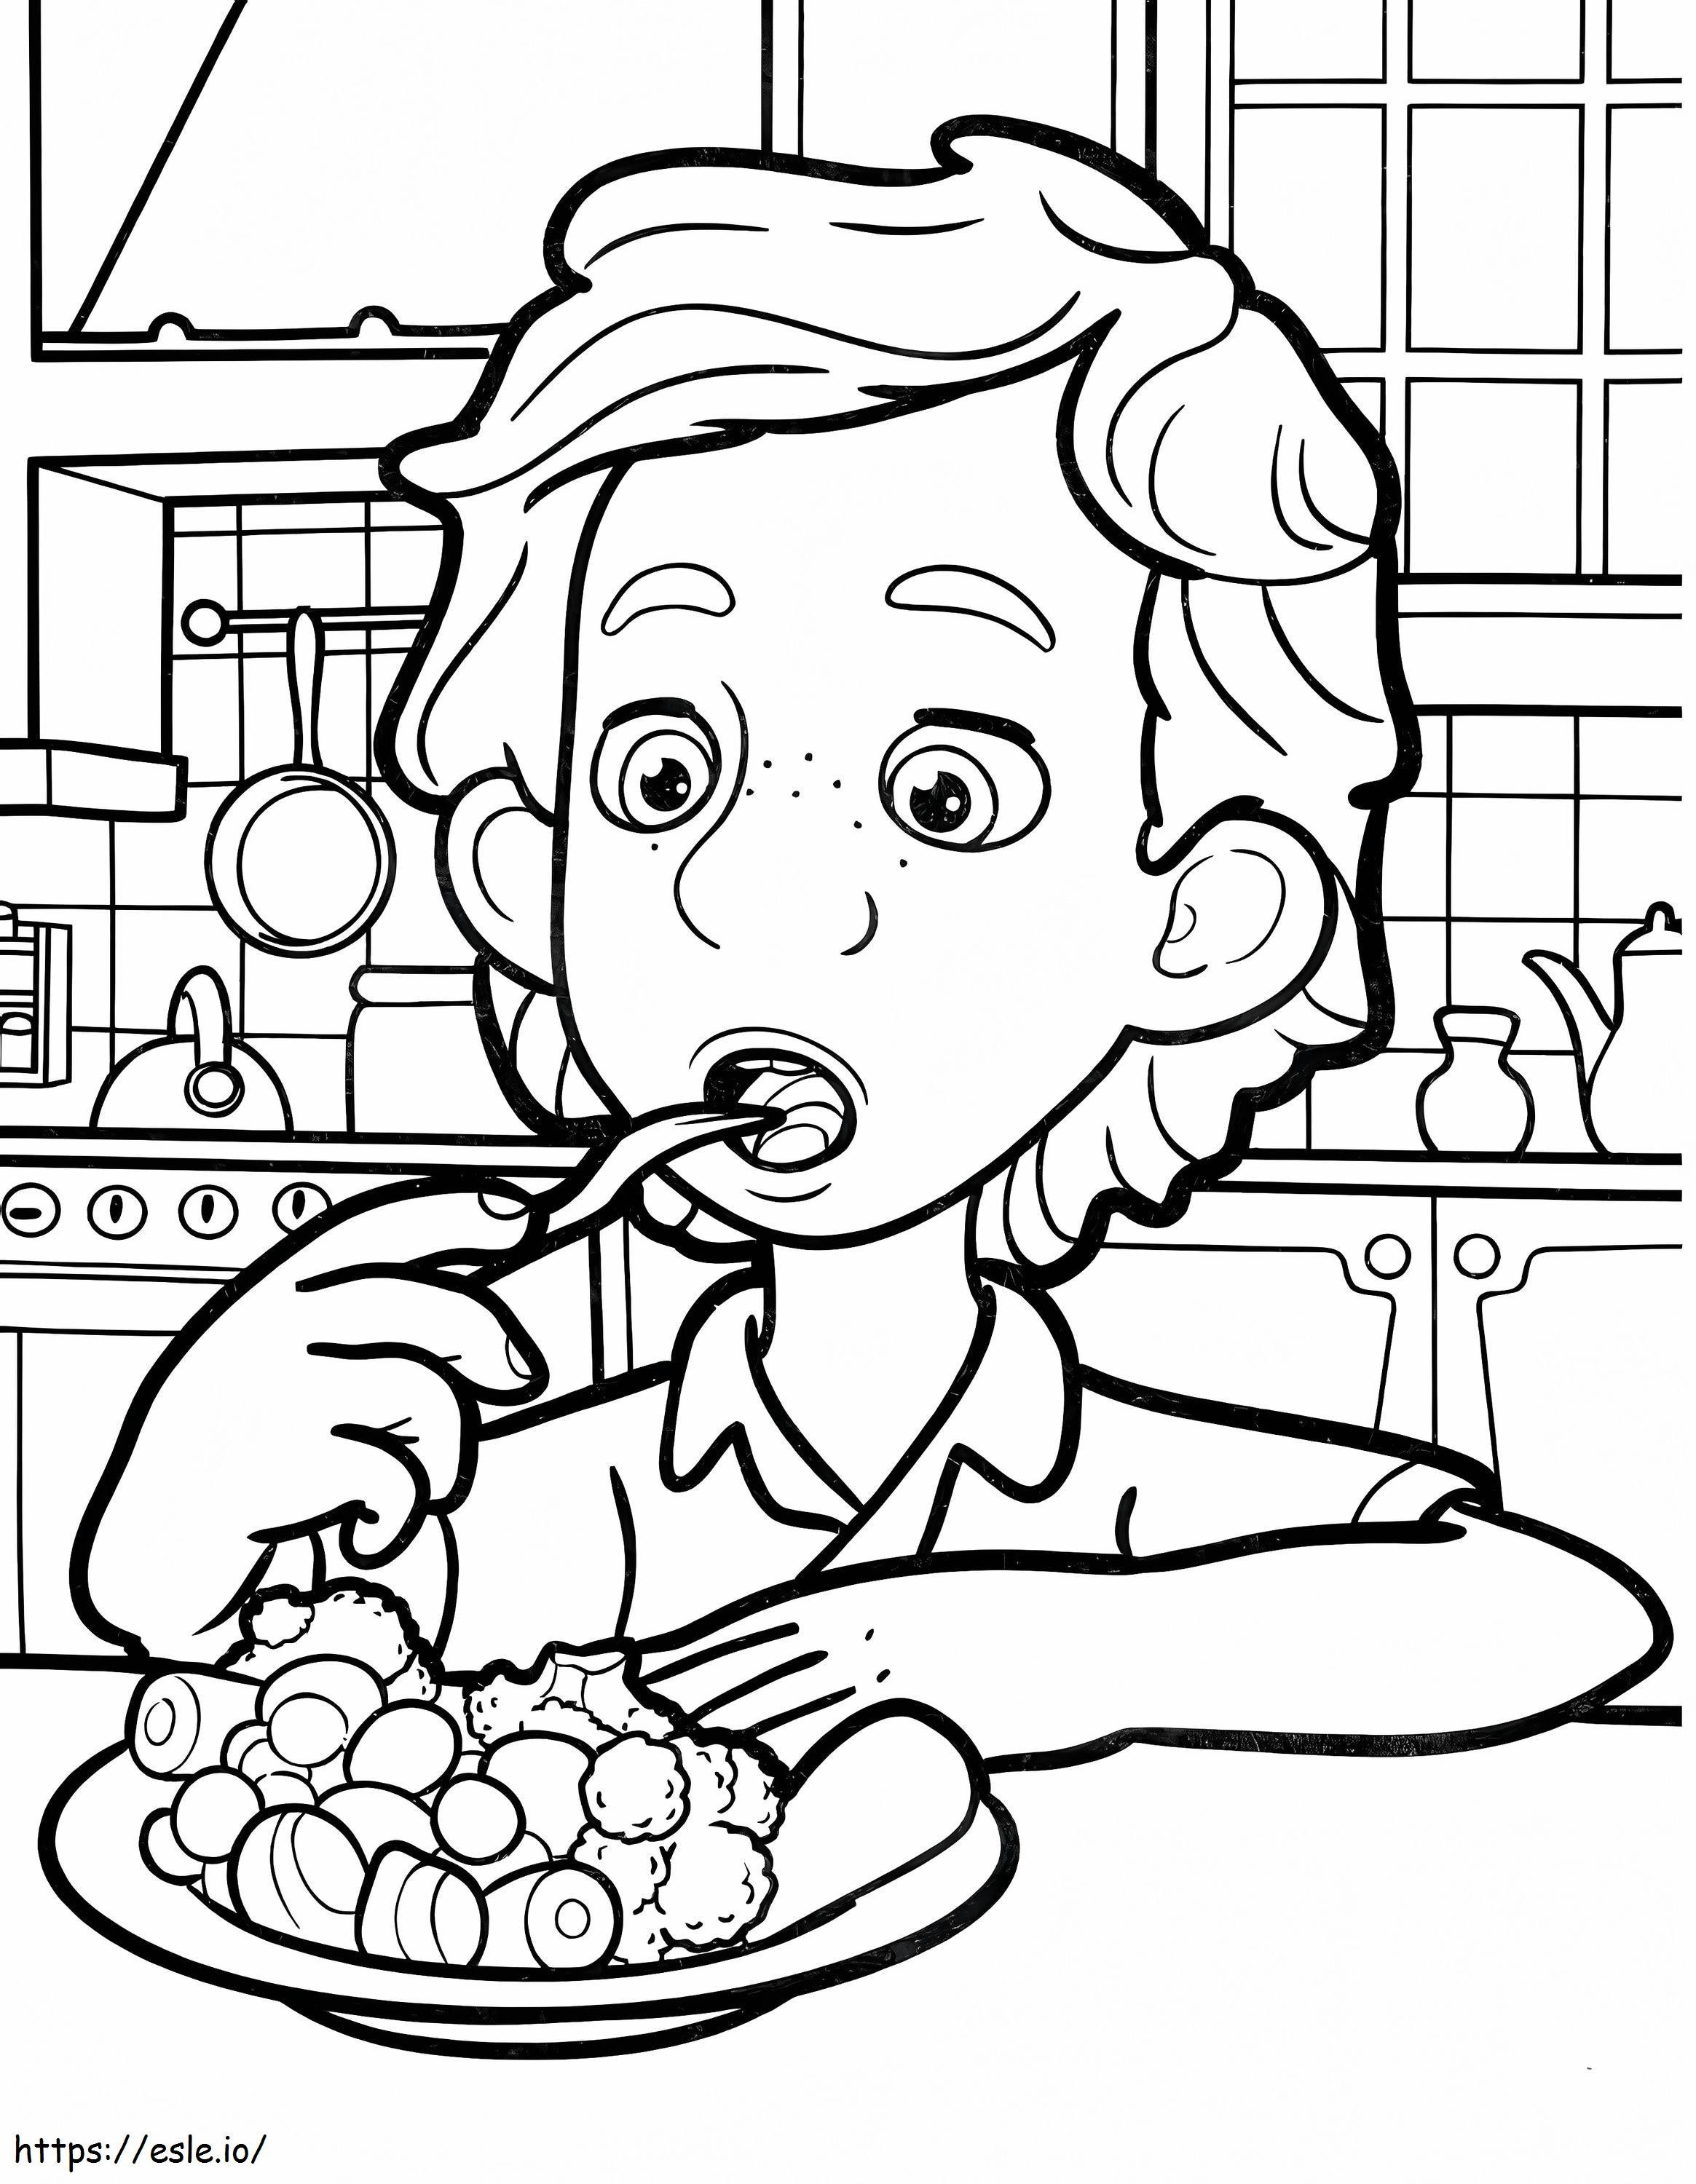 Tom From The Fixies 6 coloring page